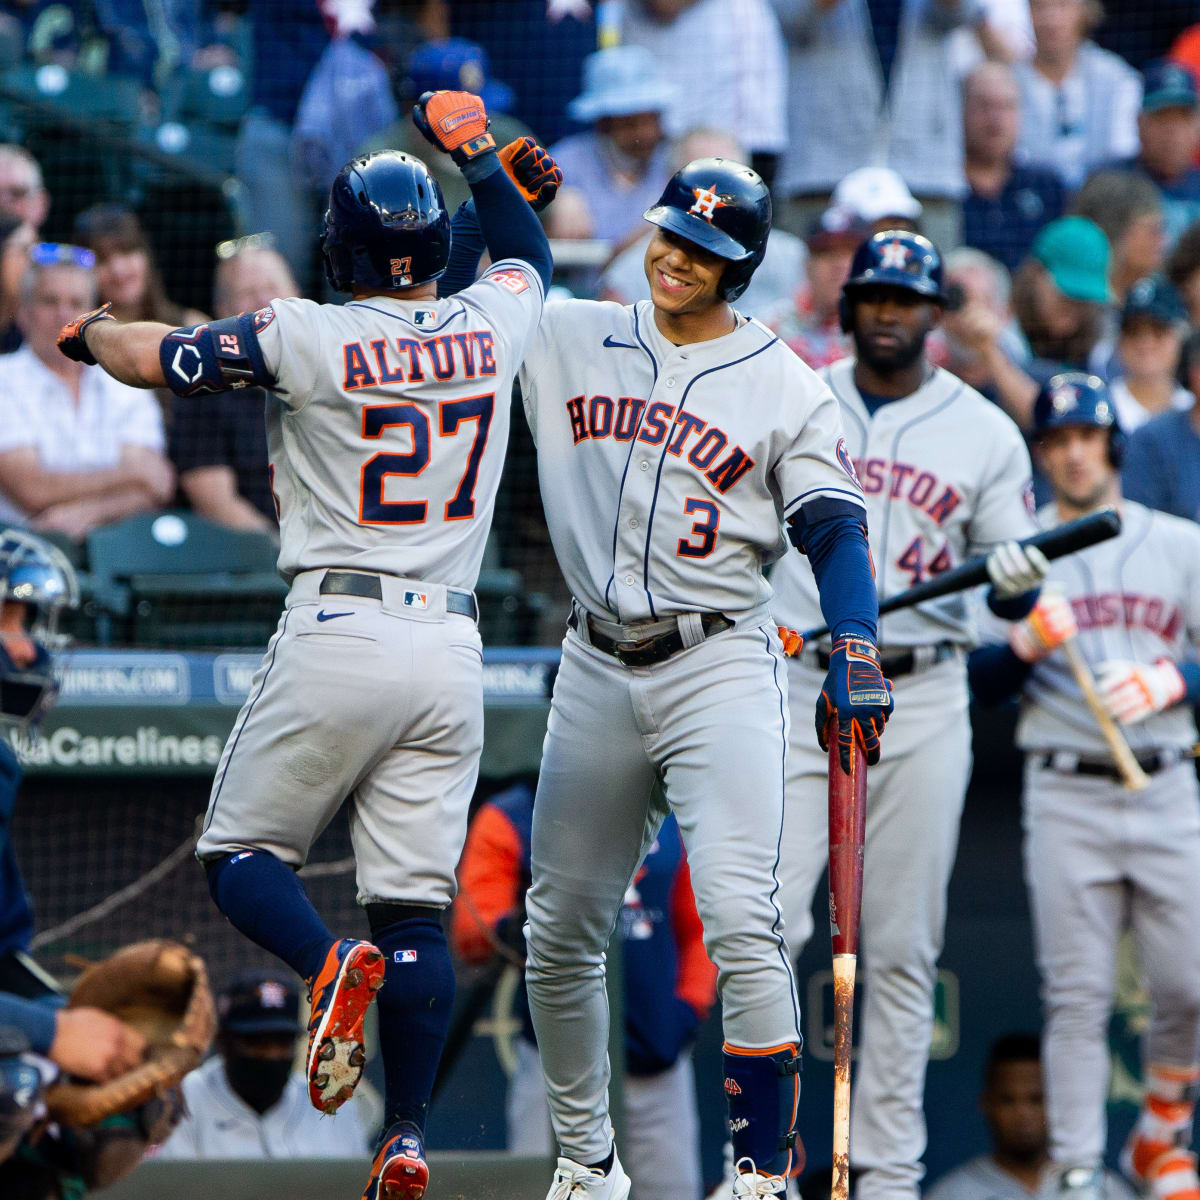 Houston Astros' star Jose Altuve gets 2 hits in first rehab game